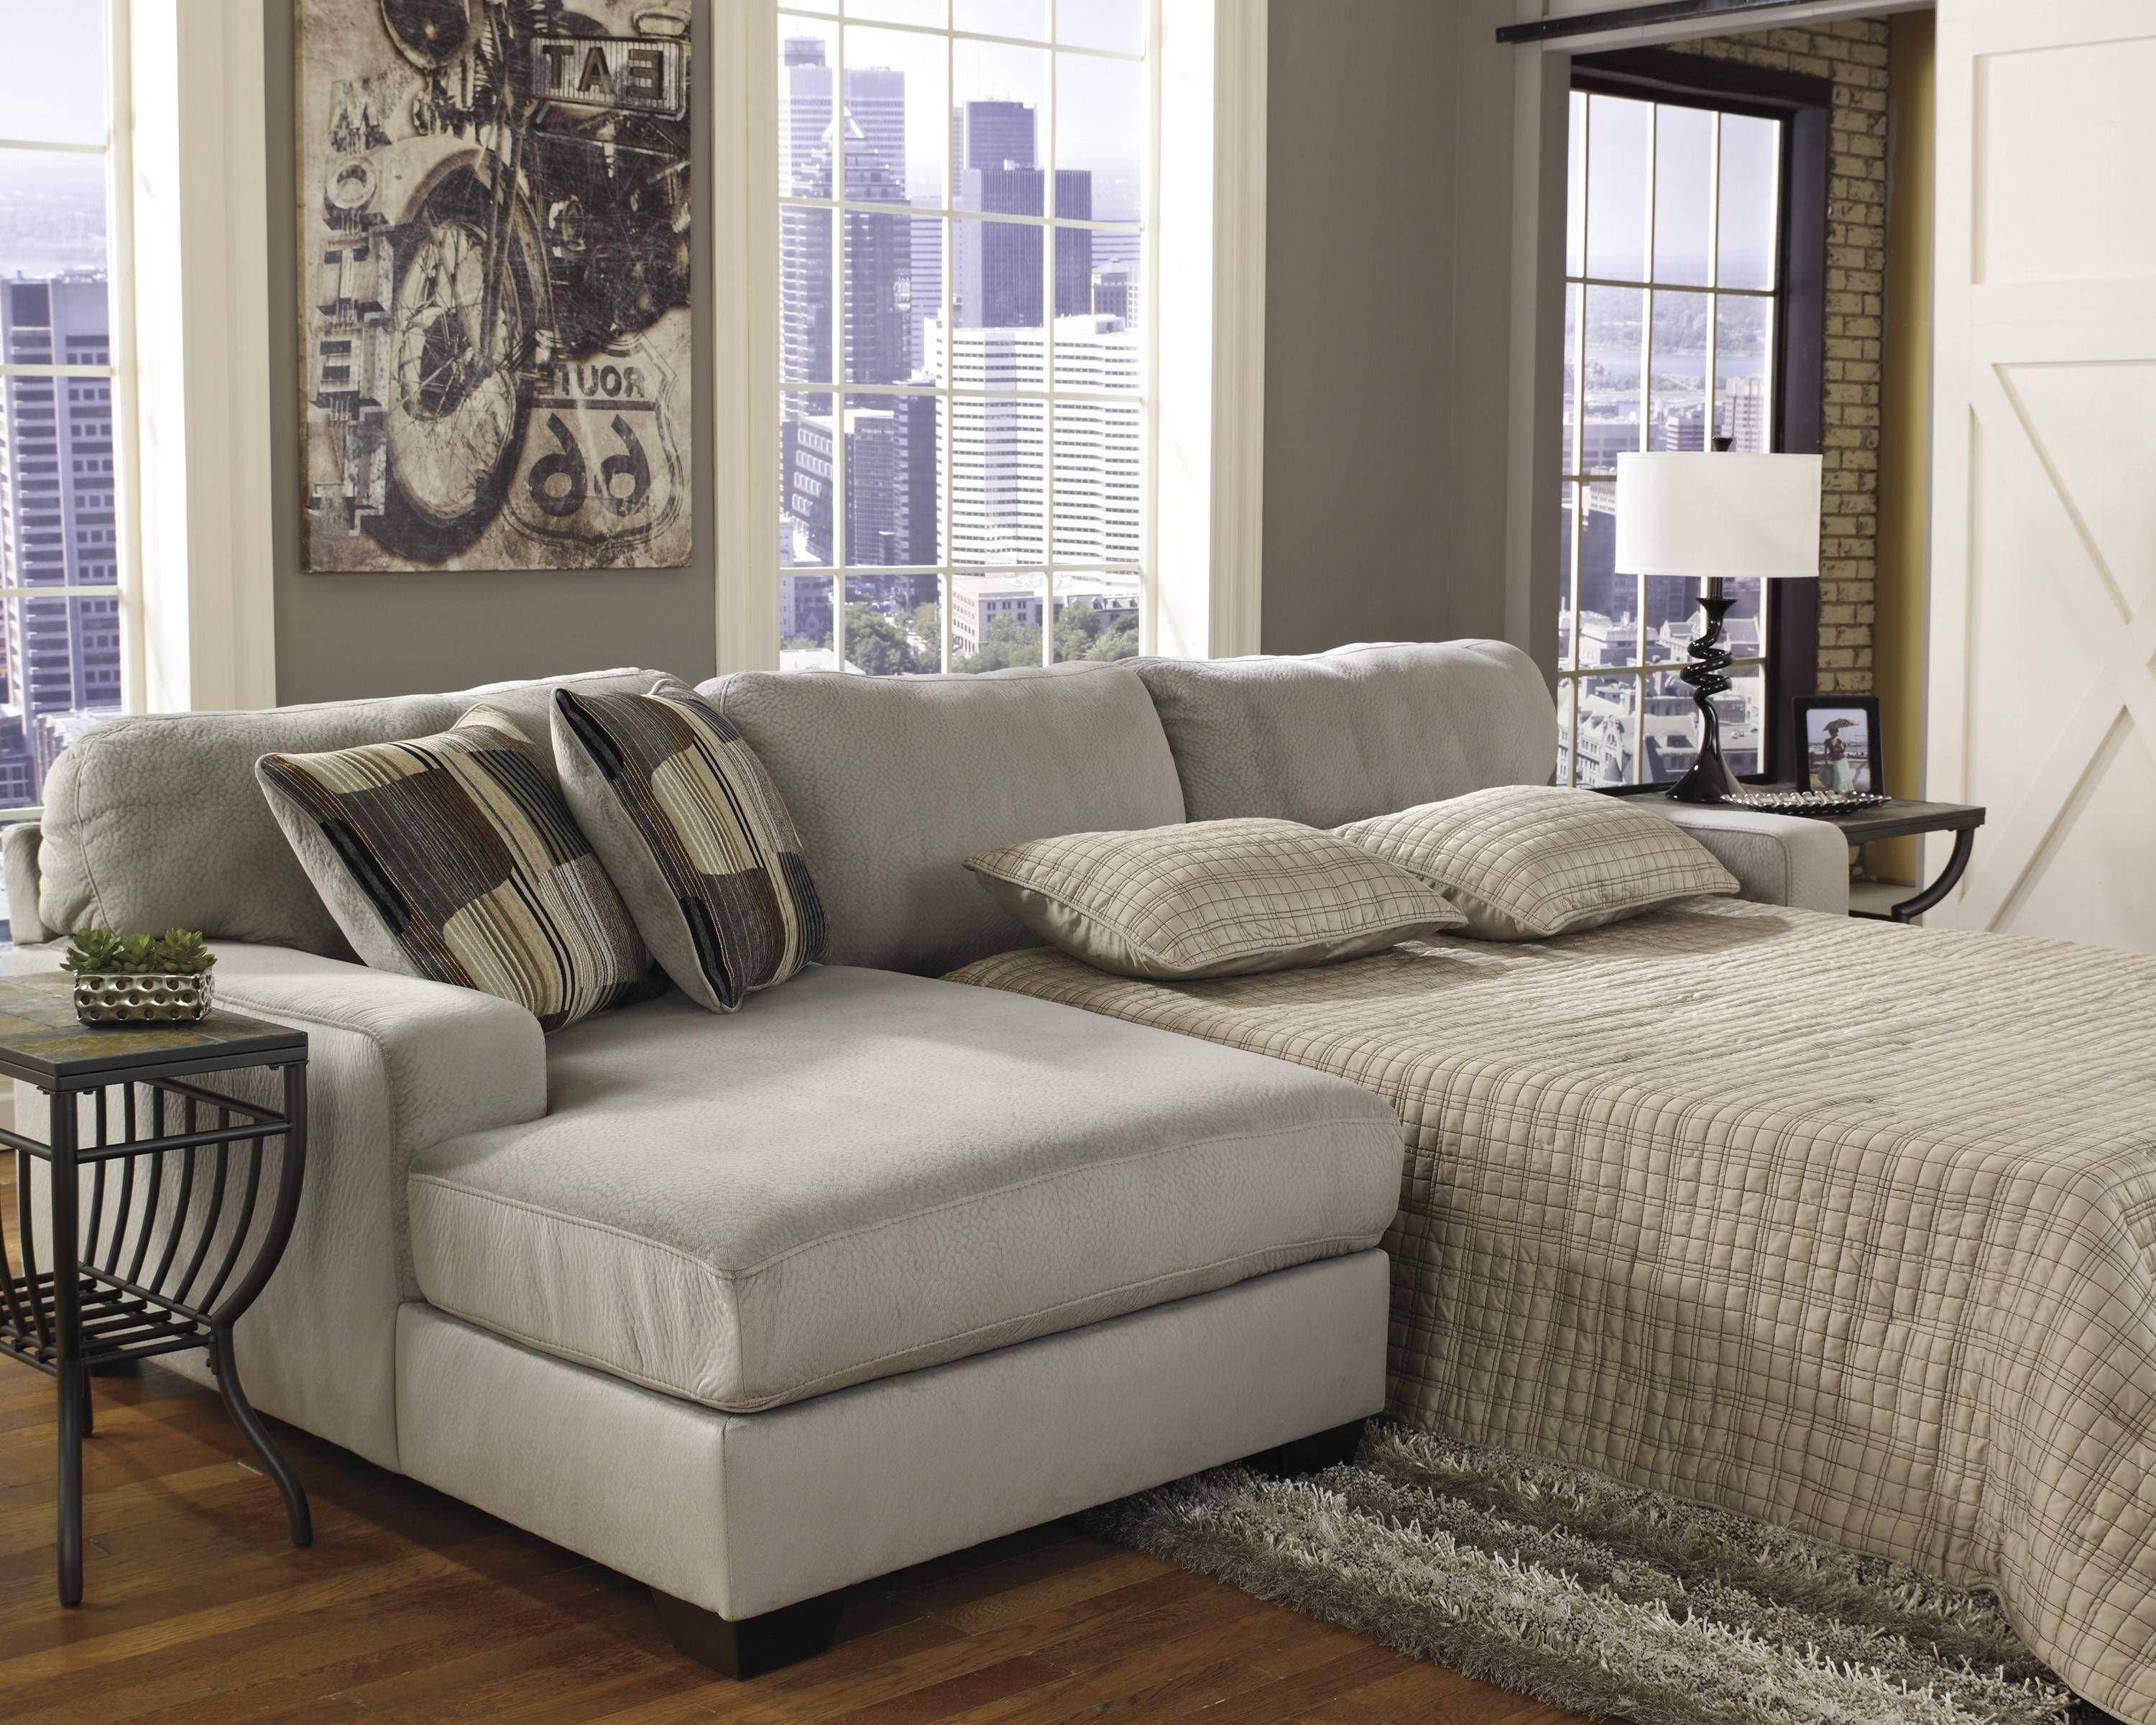 Furniture Home: Leather Sofas On Sale Sectional Fabric Furniture In Elegant Sectional Sofas (View 15 of 30)